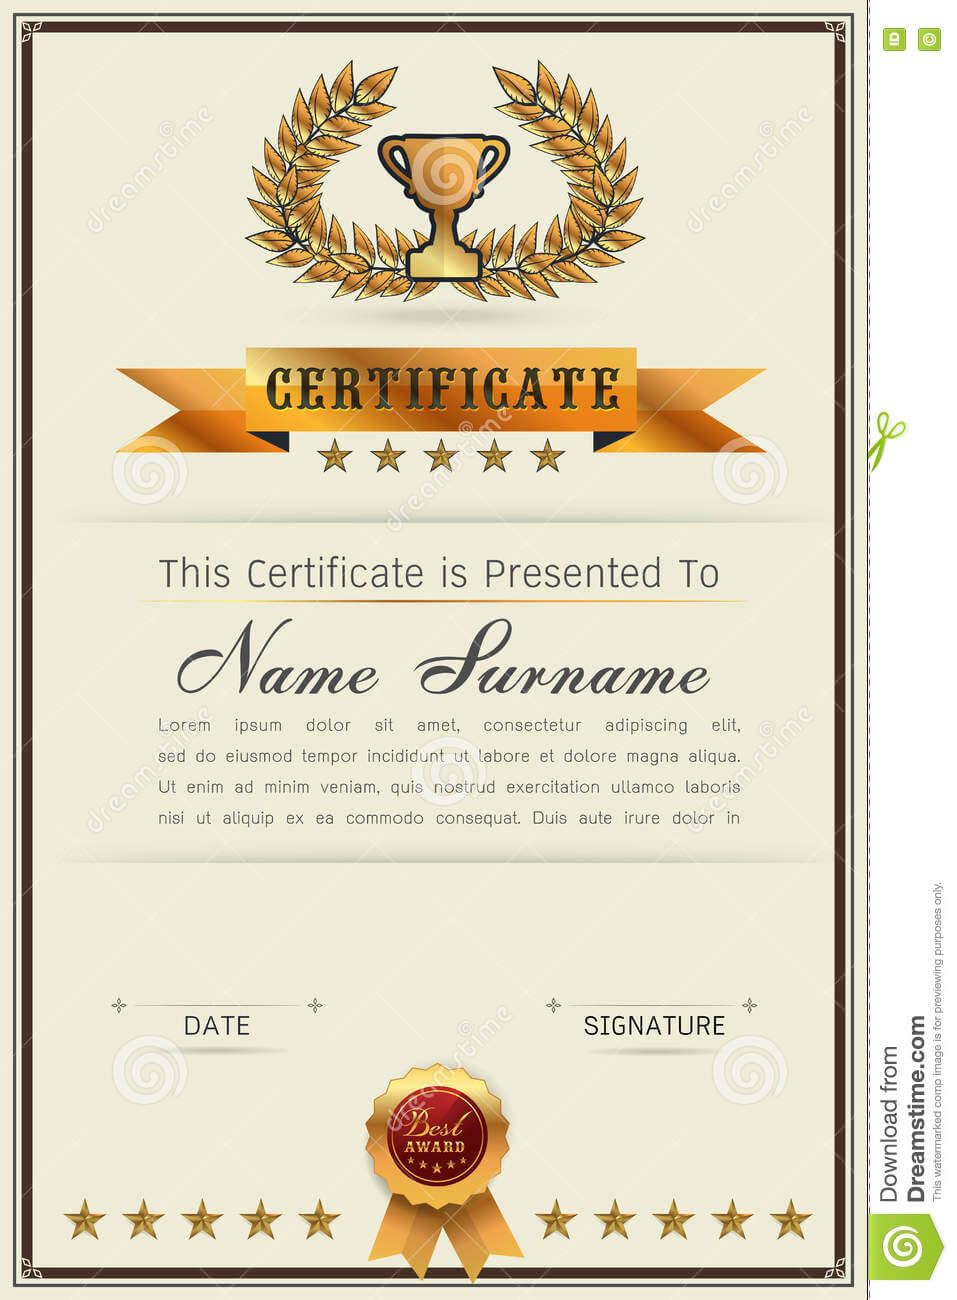 Graceful Certificate Template Stock Vector – Illustration Of With Regard To Qualification Certificate Template